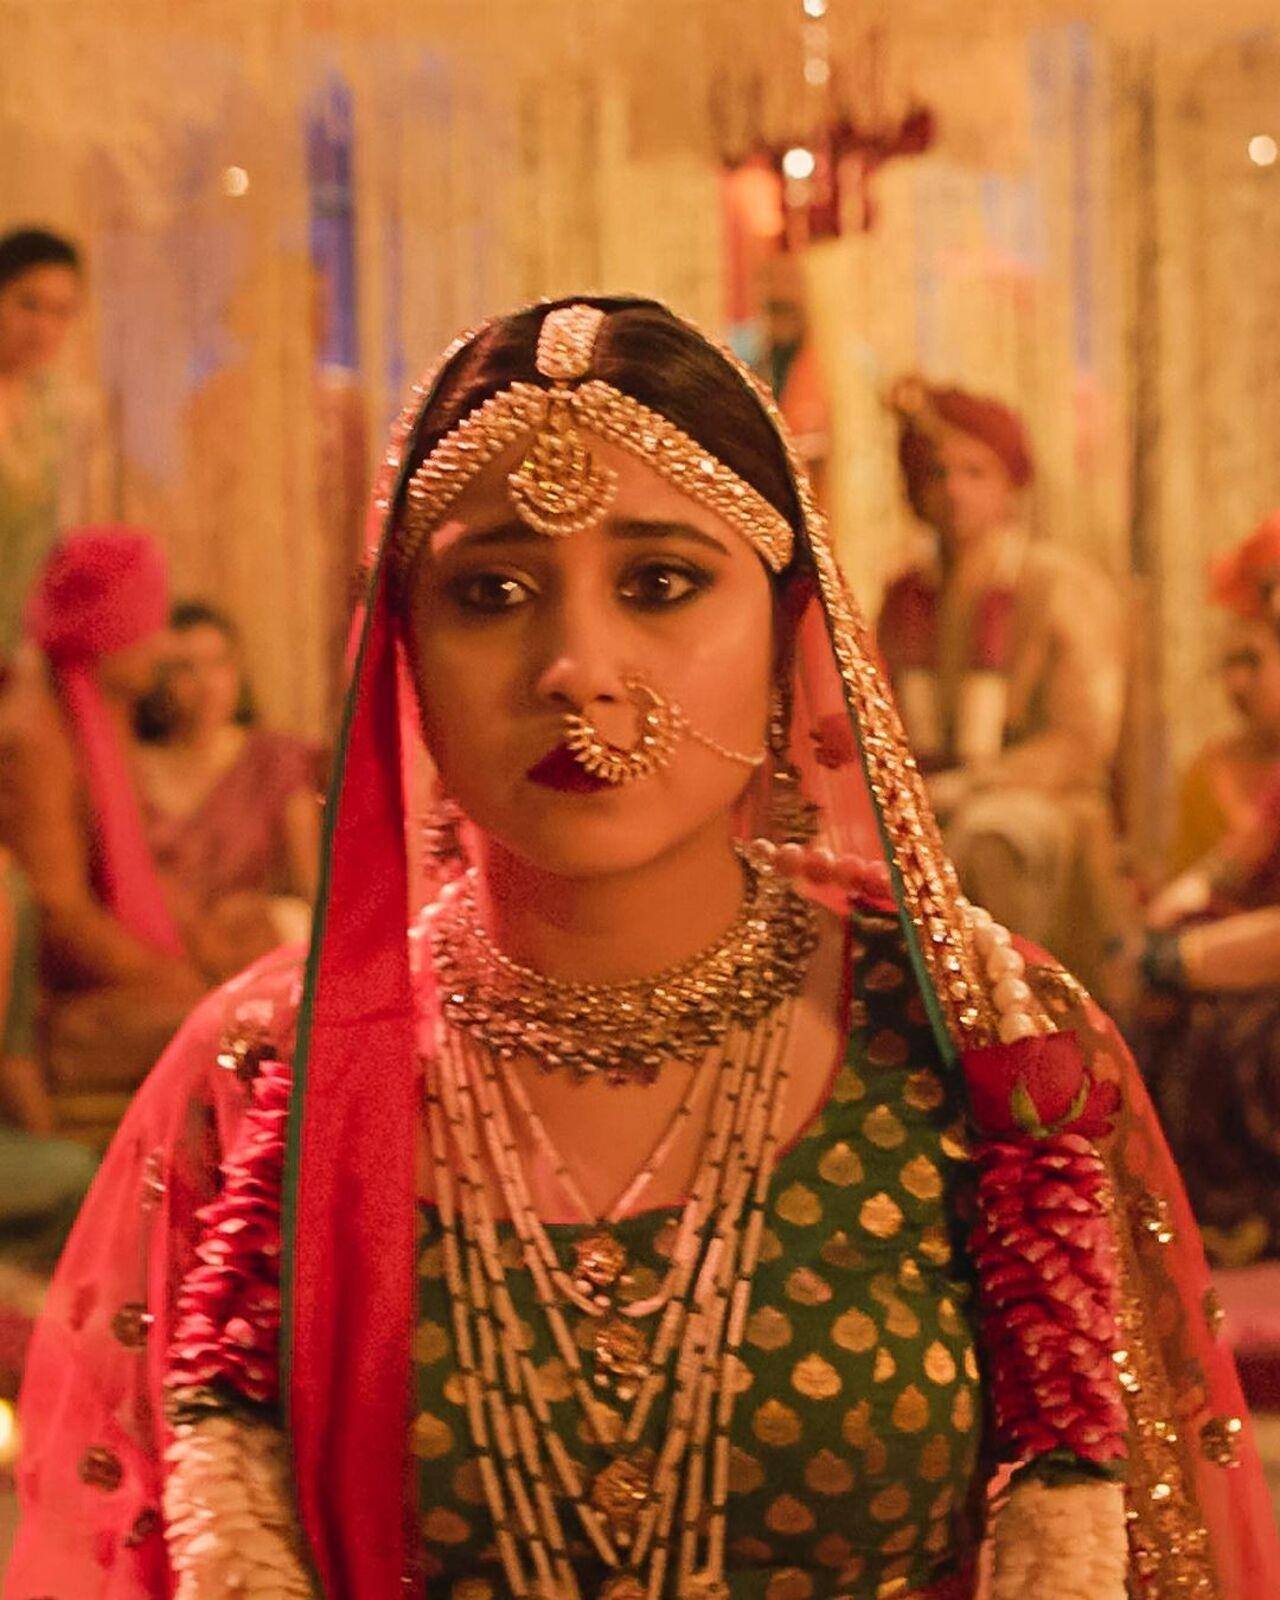 Shweta Tripathi looked stunning in her bridal outfit in the timeless colour combination of green and pink